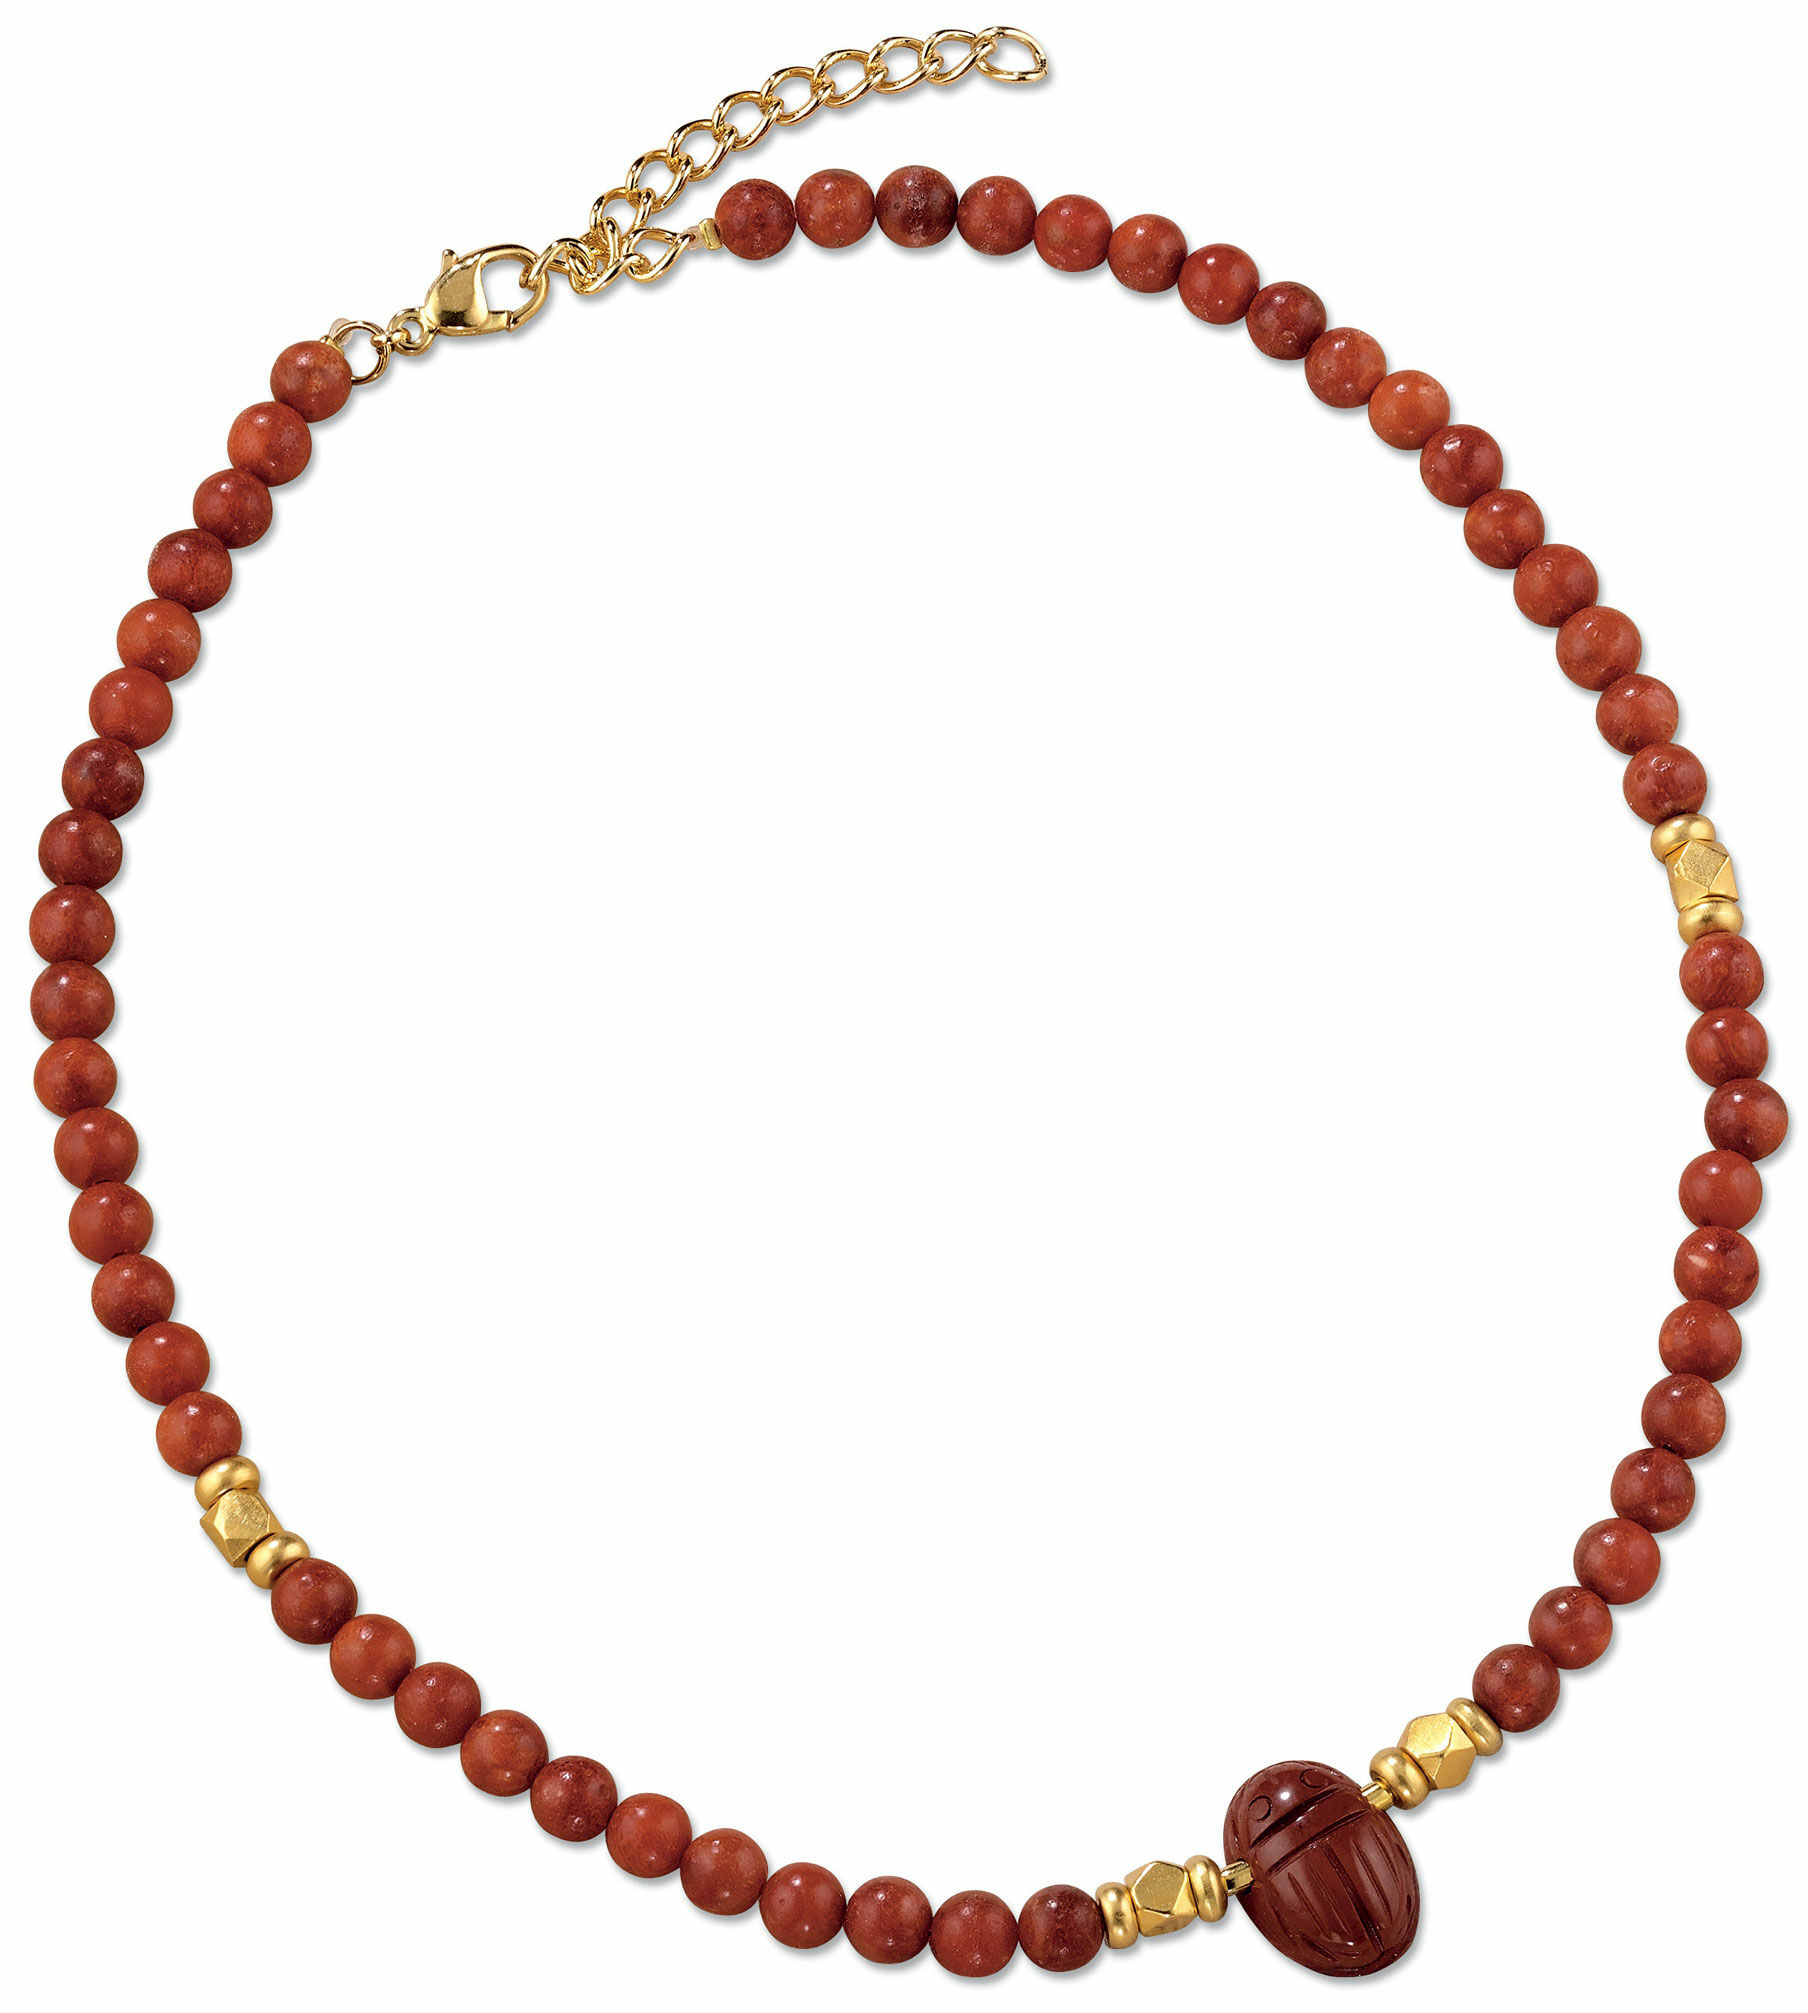 Scarab Necklace Made of Jasper and Cultured Coral Pearls by Petra Waszak